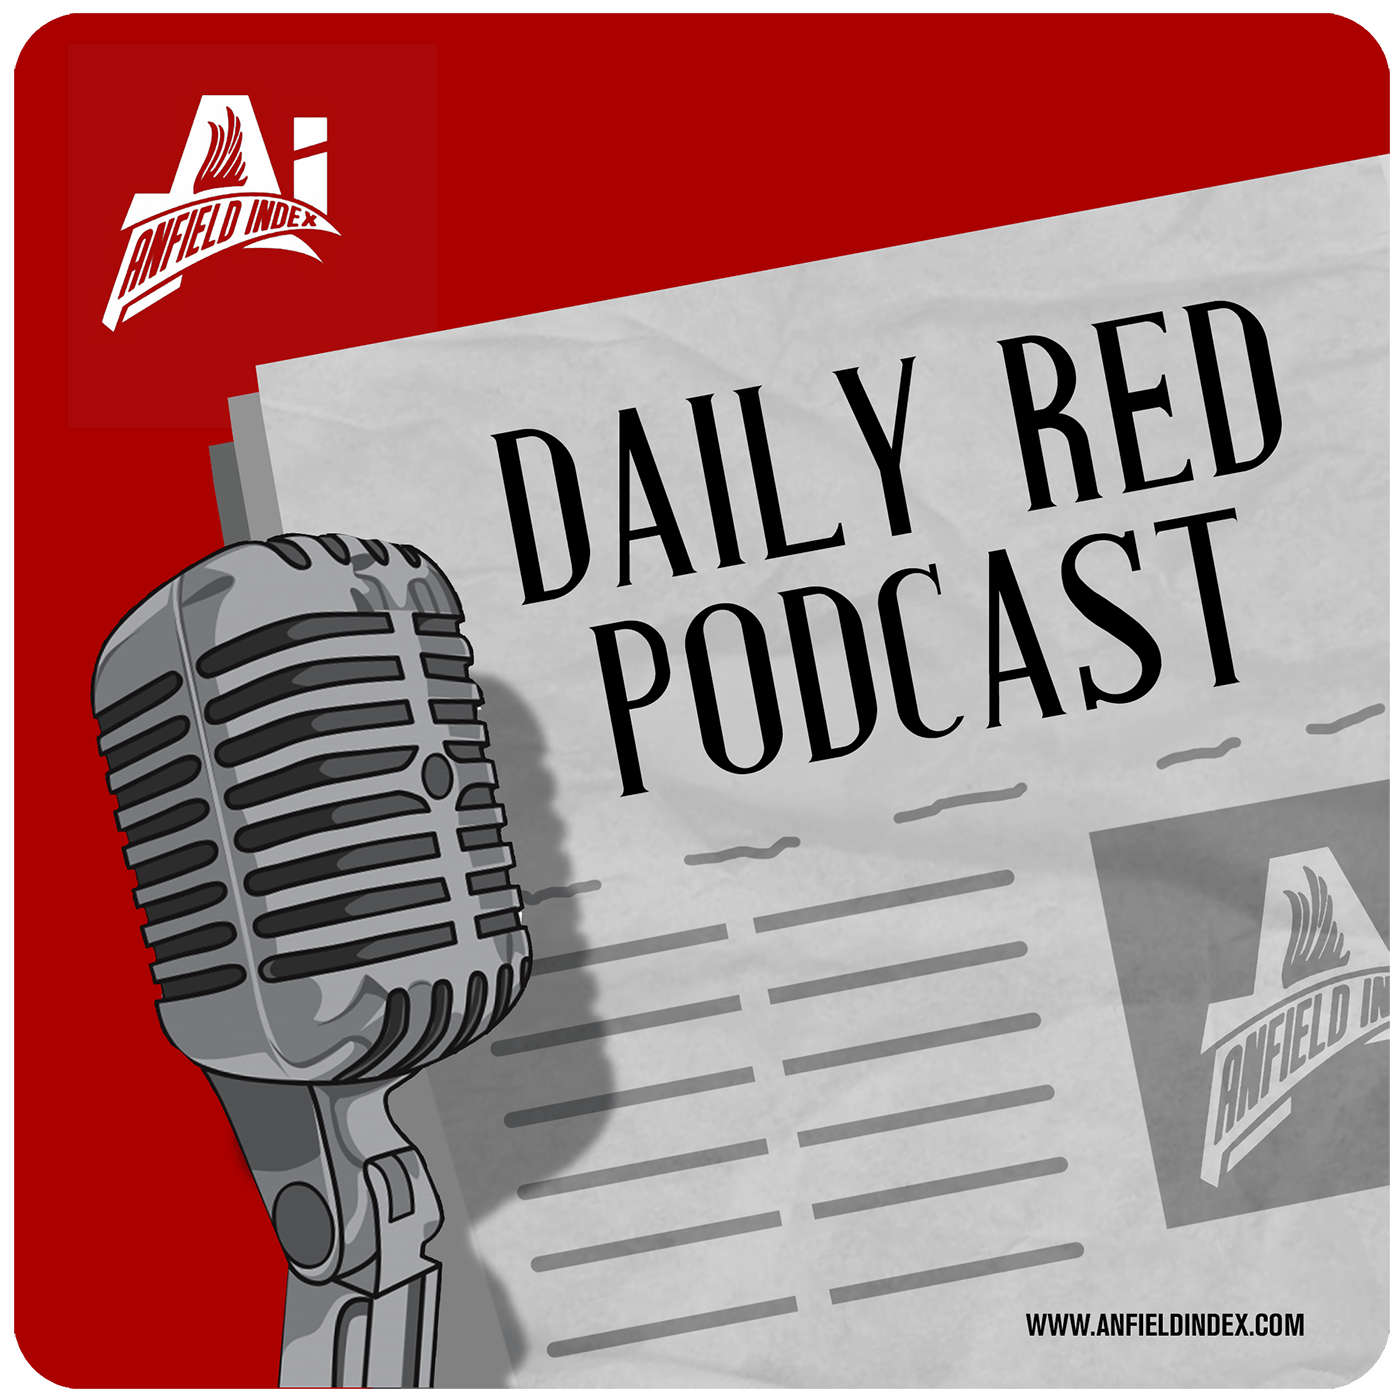 Brighton Ahead! Daily Red Podcast